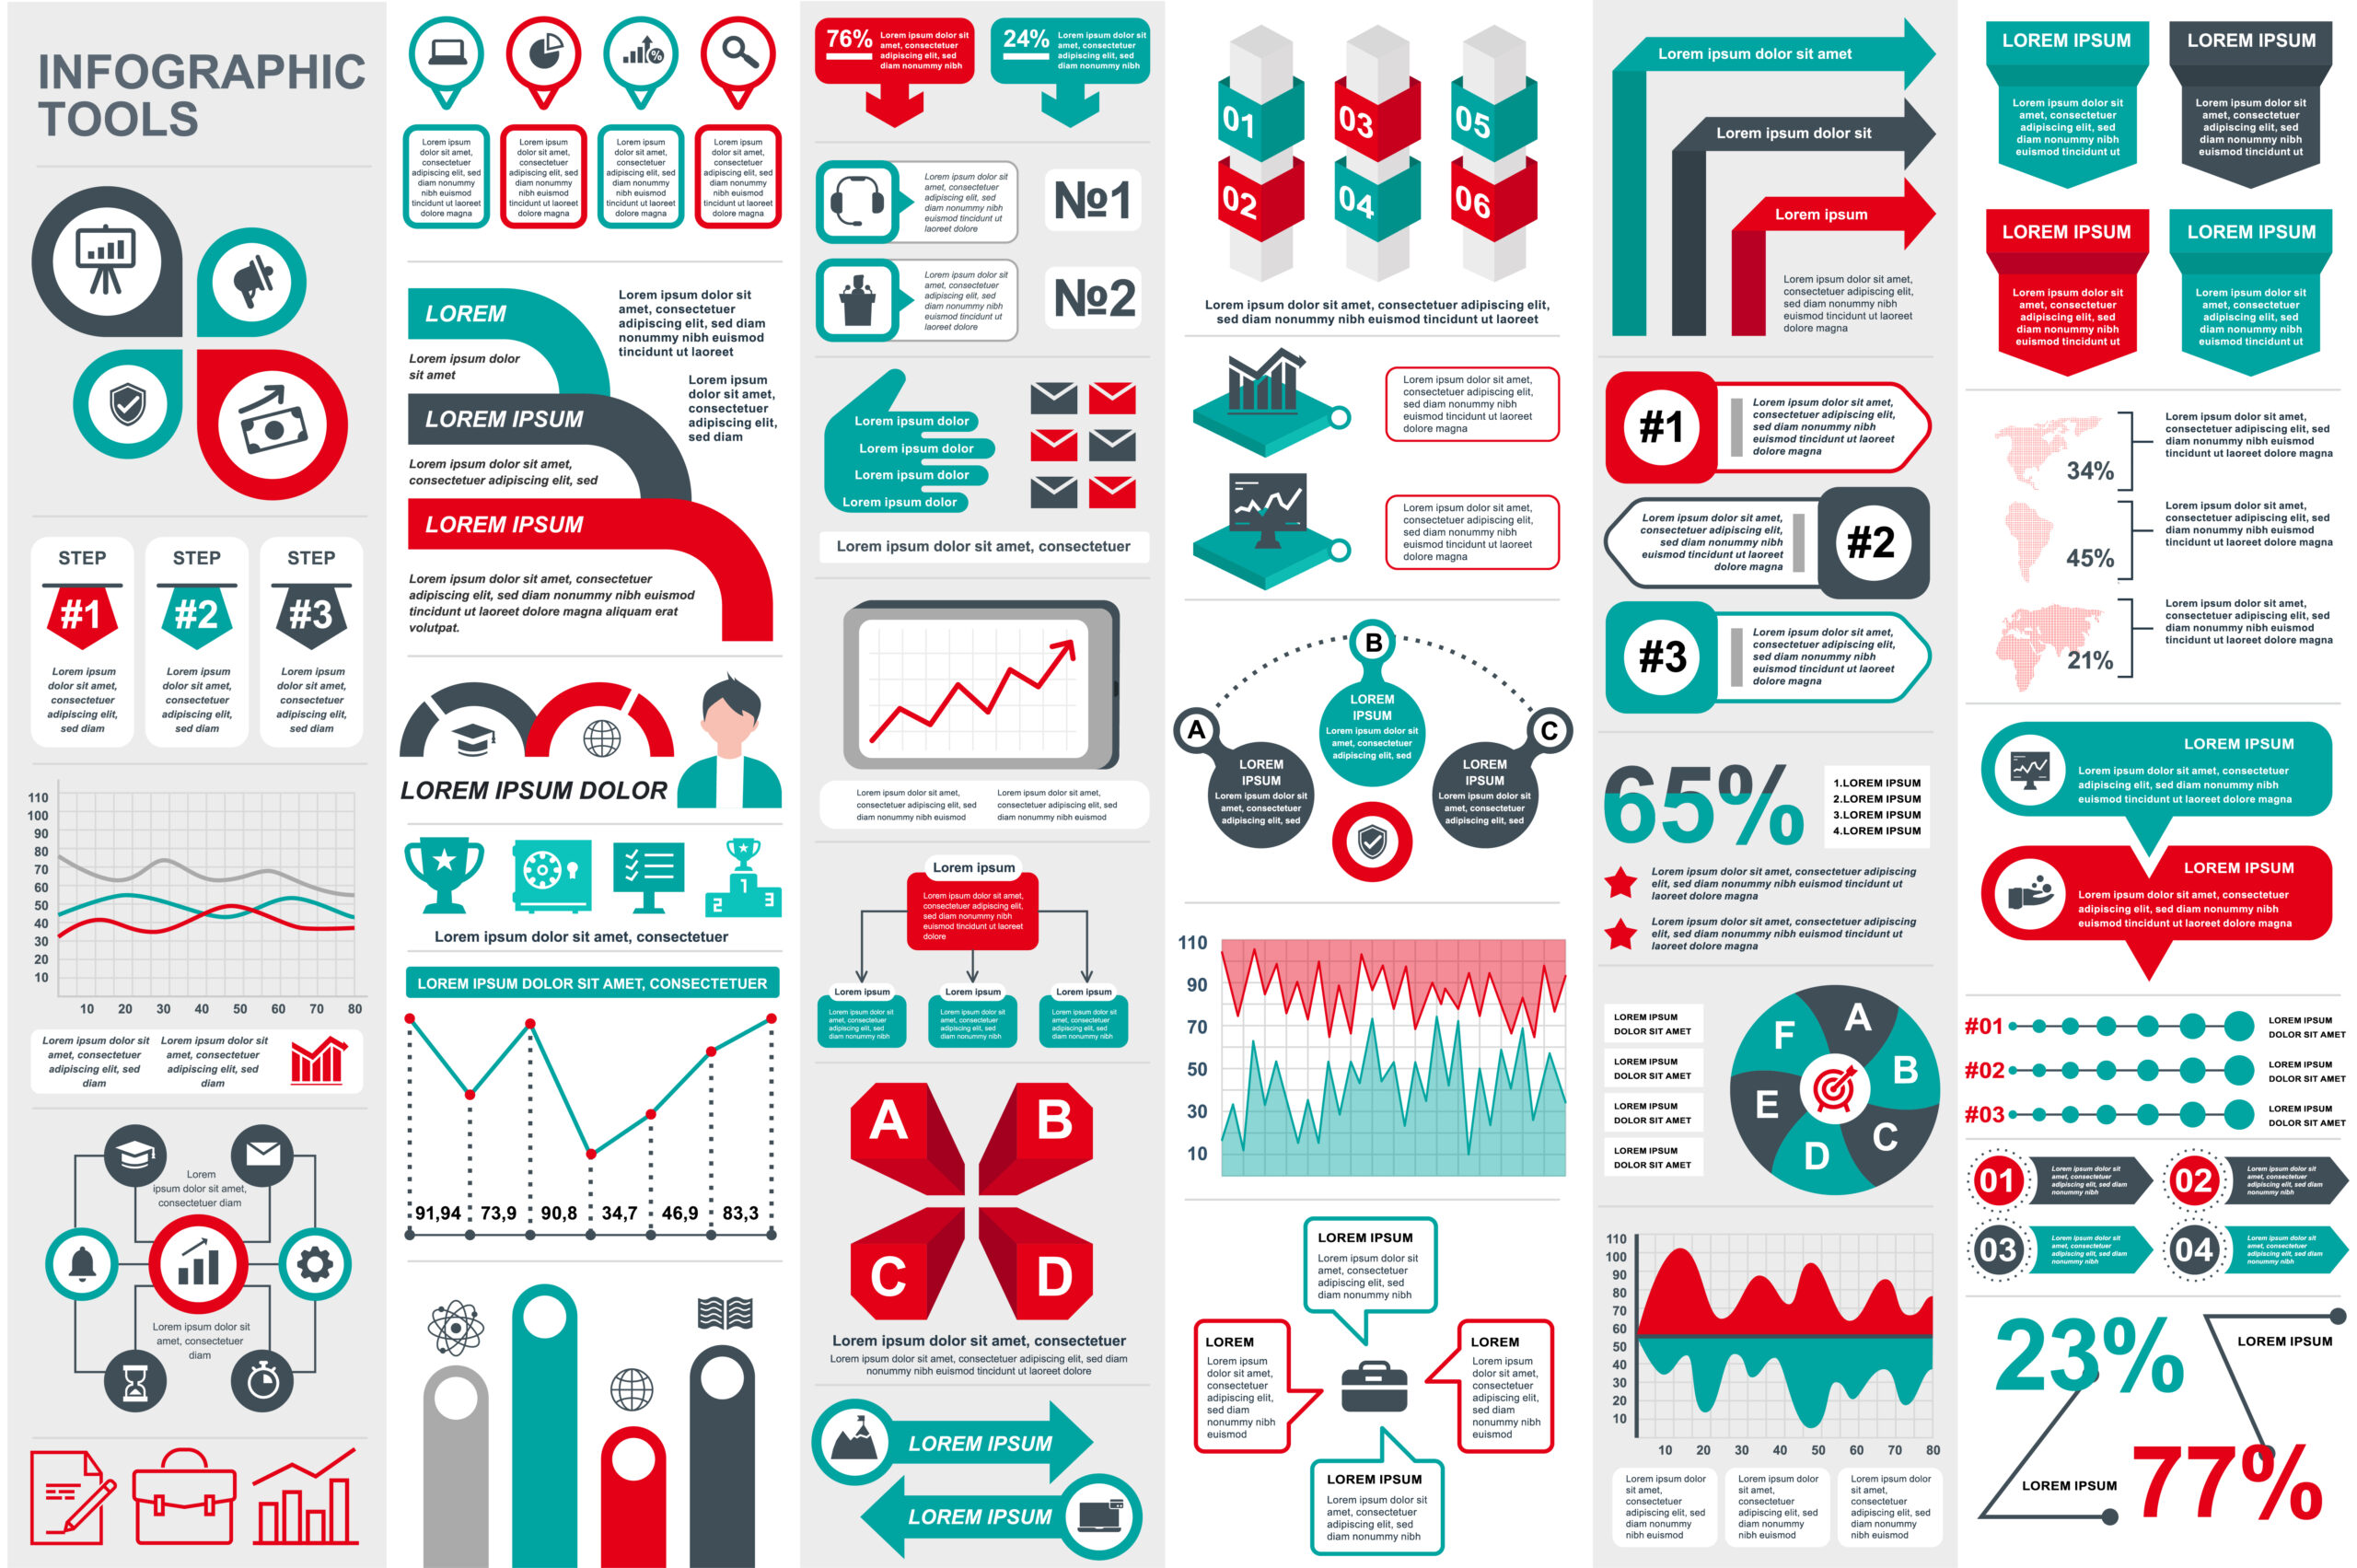 Getting it right: why infographics are not the same as data visualizations